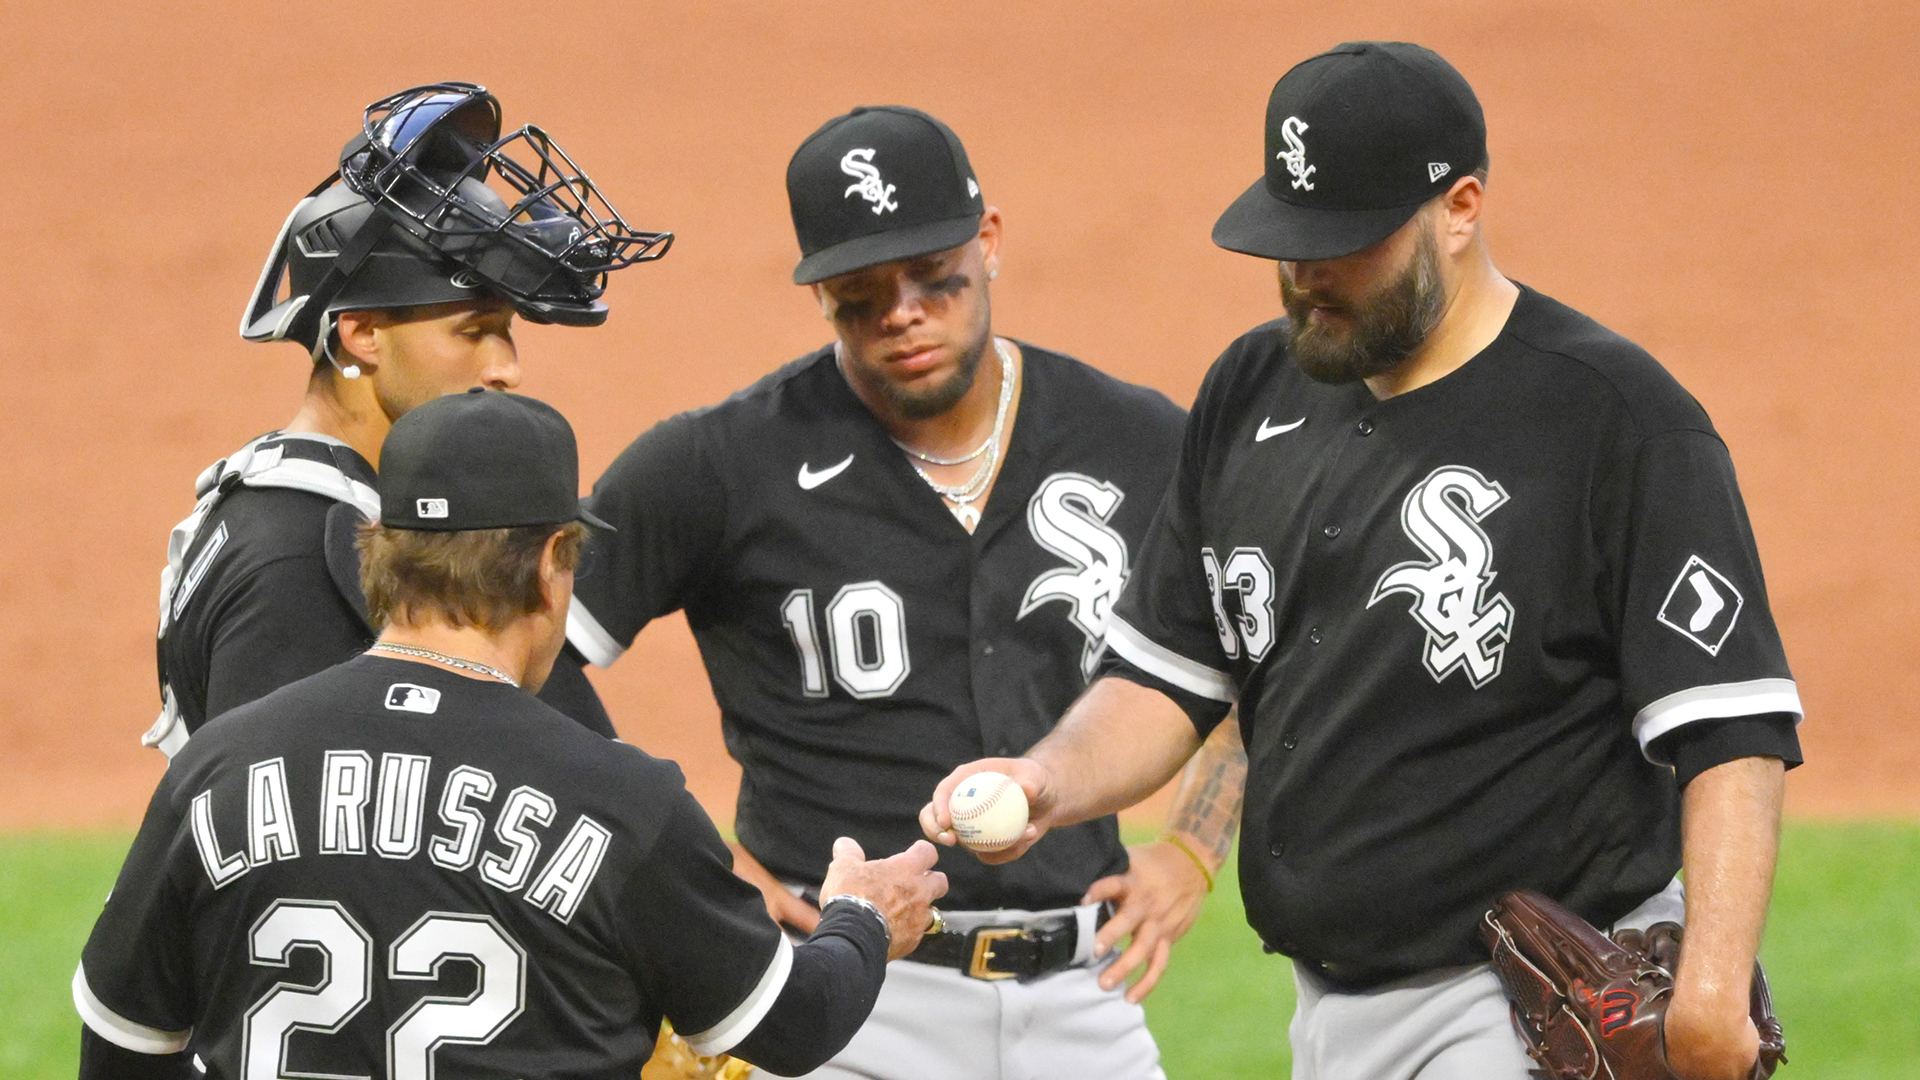 Lance Lynn gives up 4 HR in White Sox loss to Twins – NBC Sports Chicago